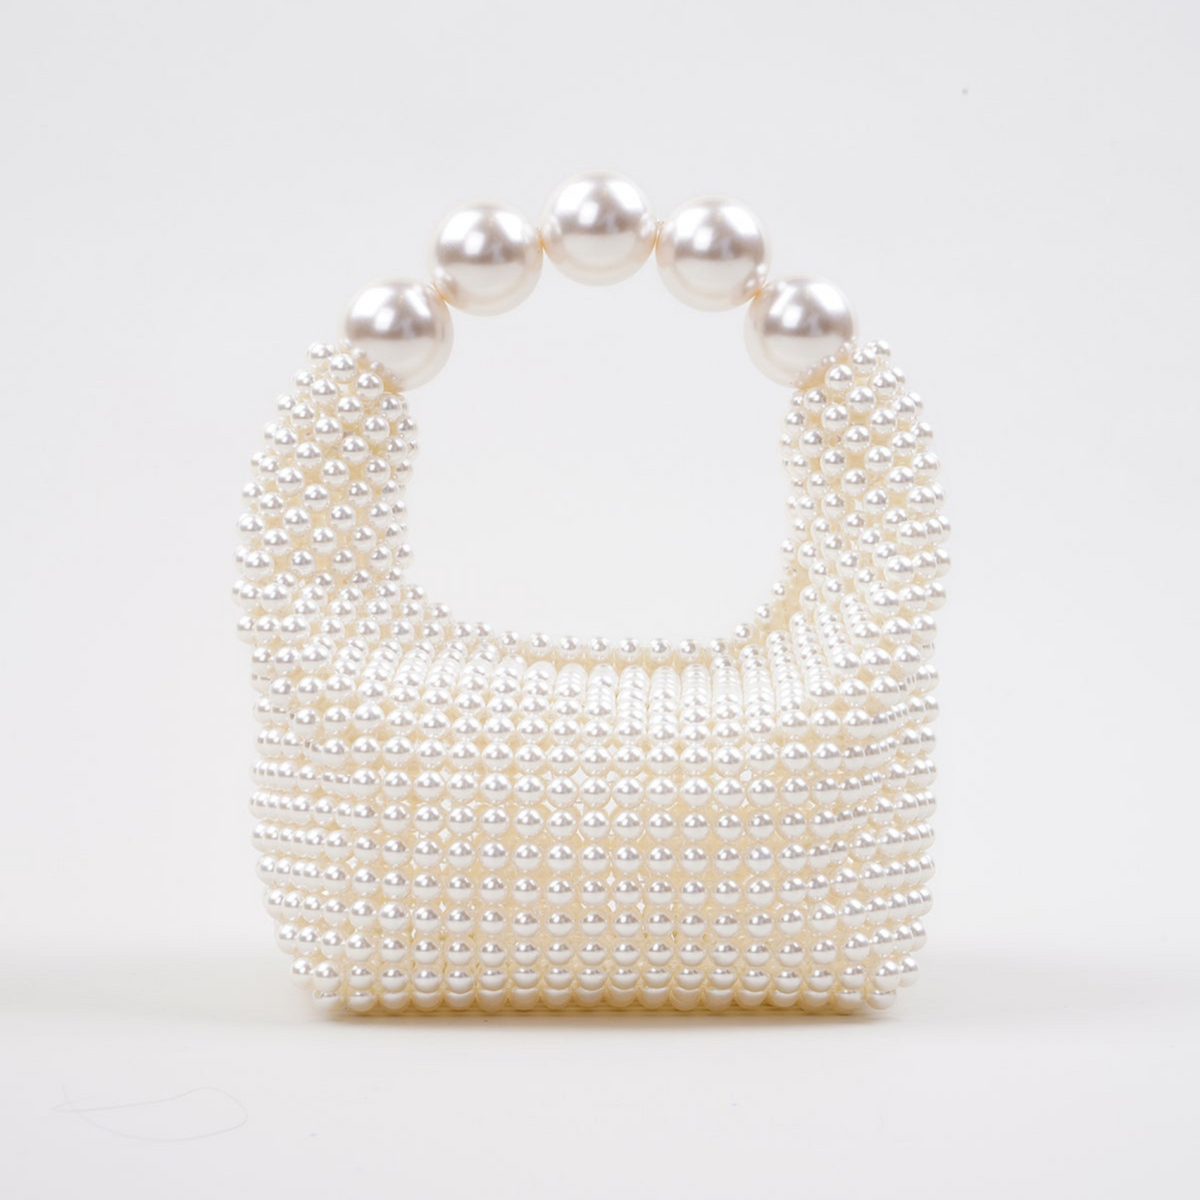 Vanina Nuit Blanche Pearl Bag | THE AFTERWHITE